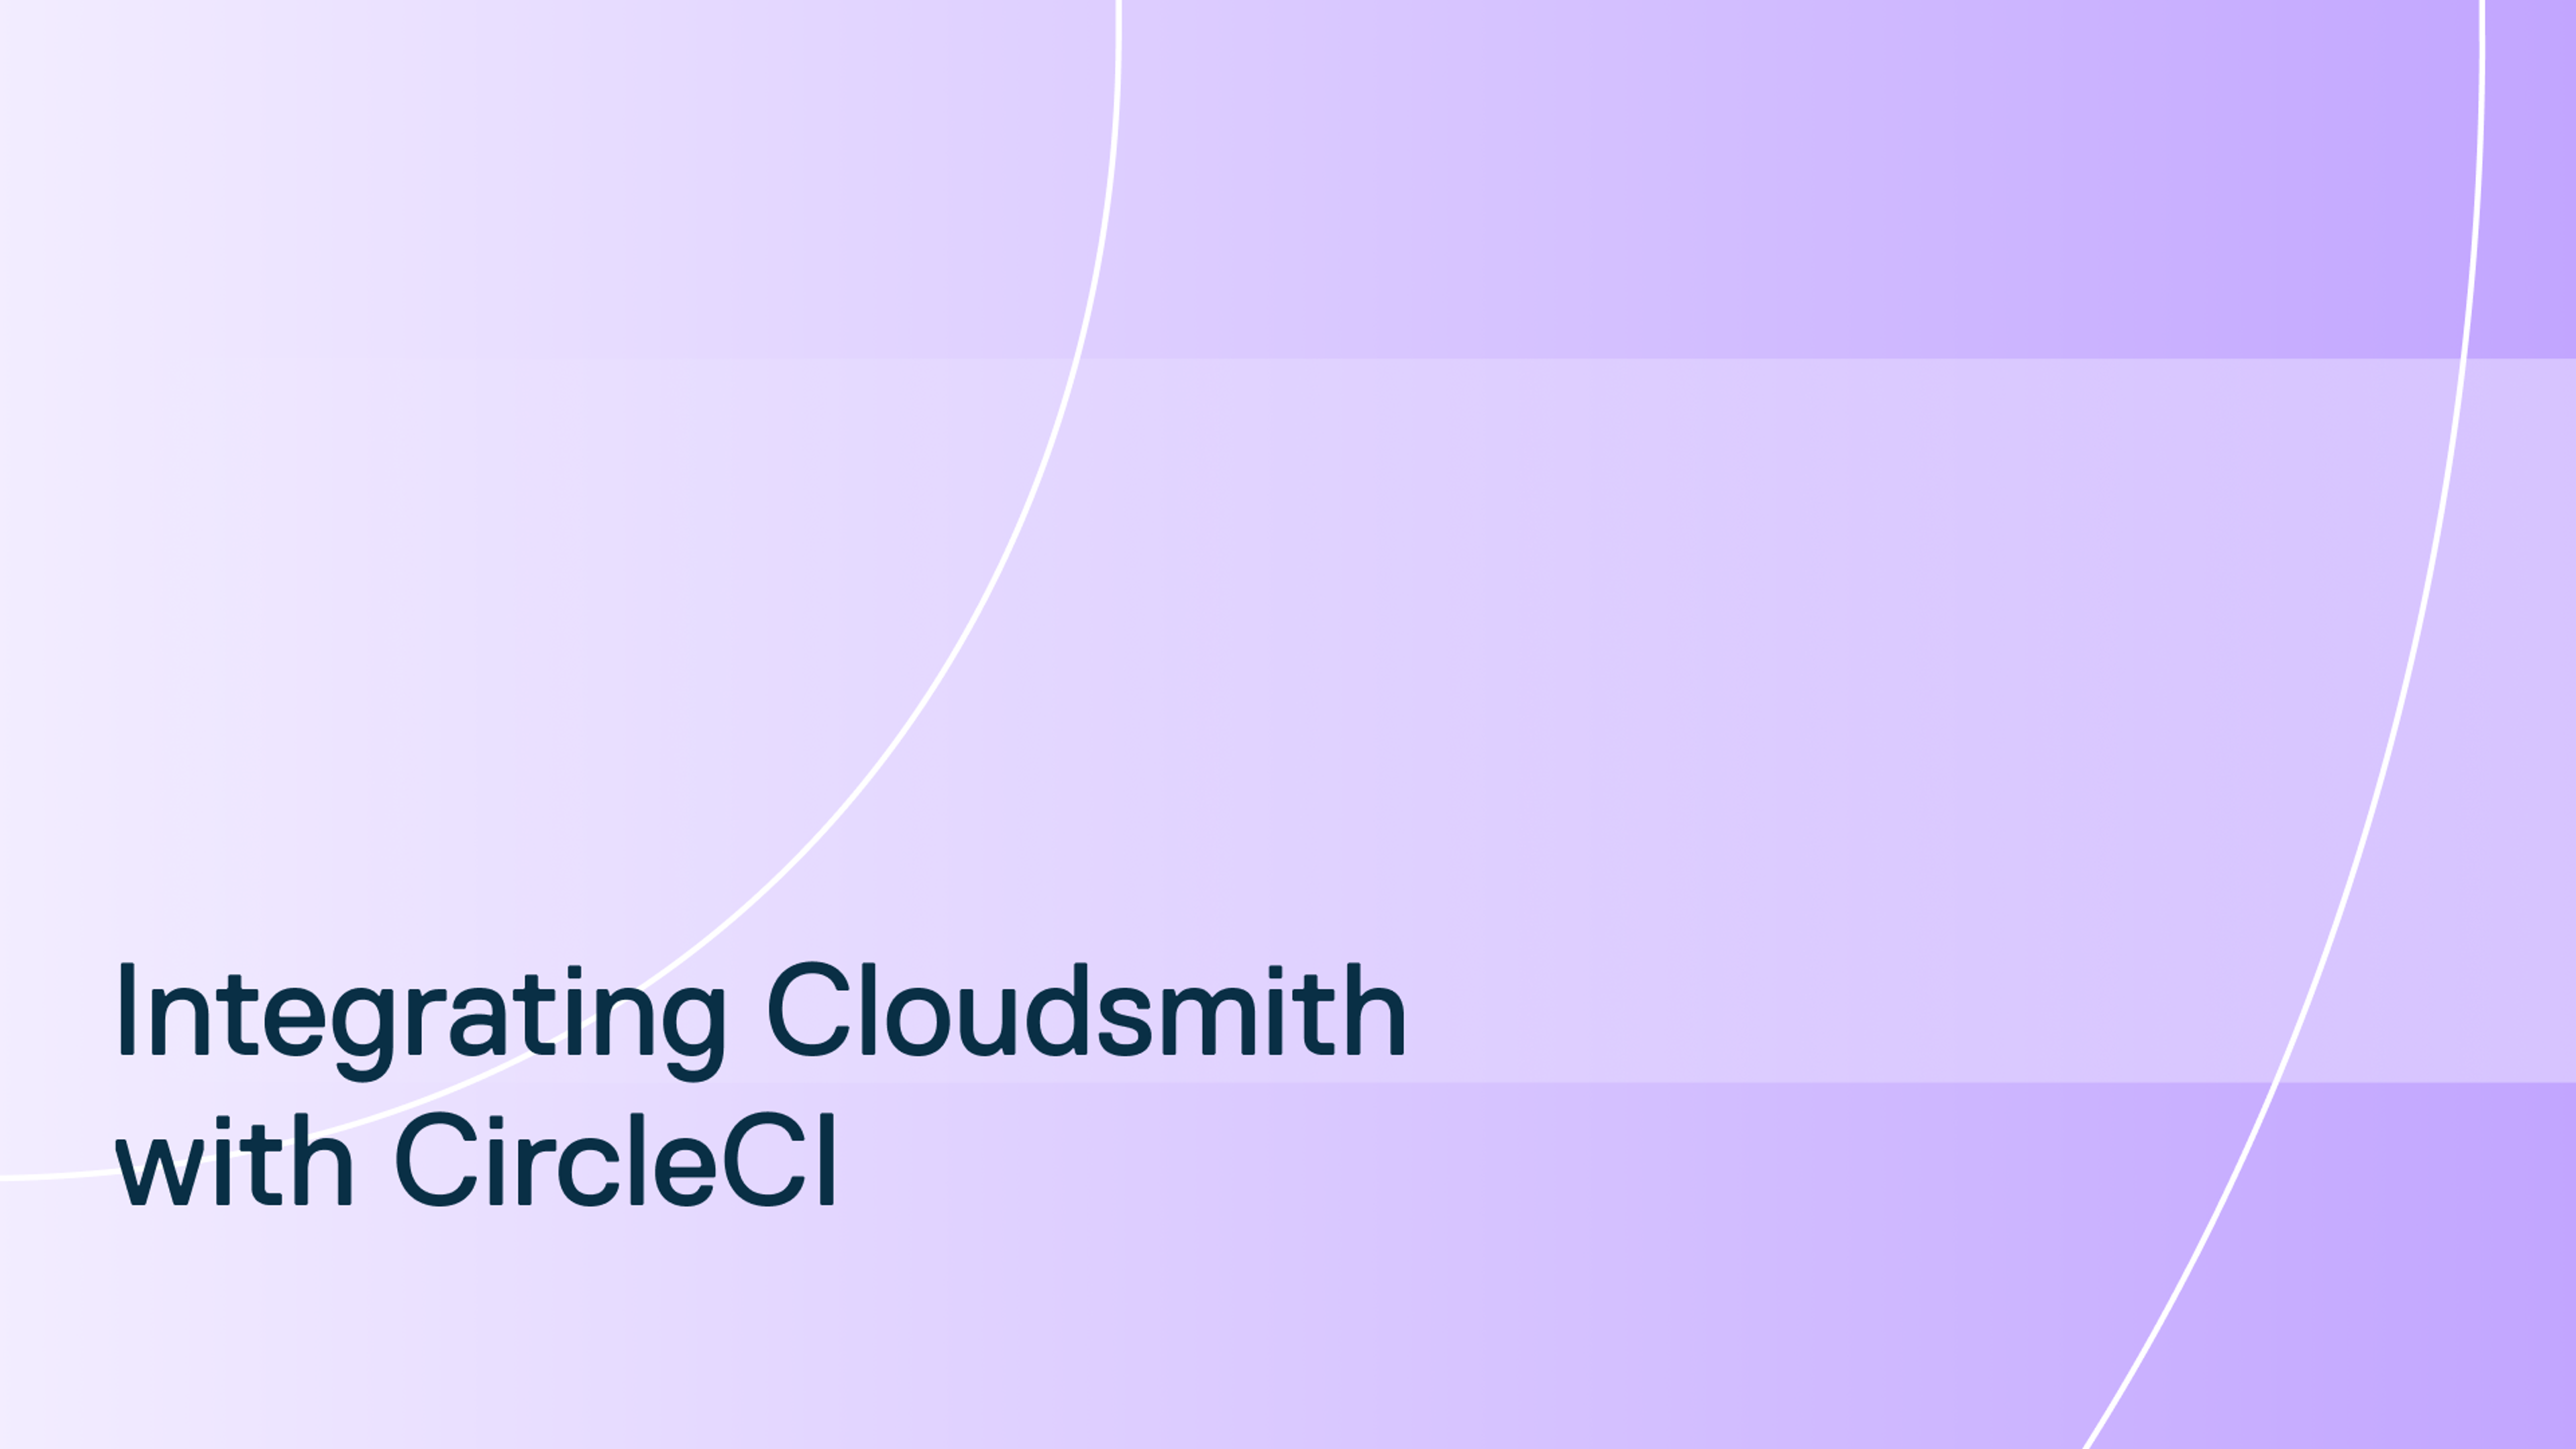 Using Circle CI to push packages to Cloudsmith